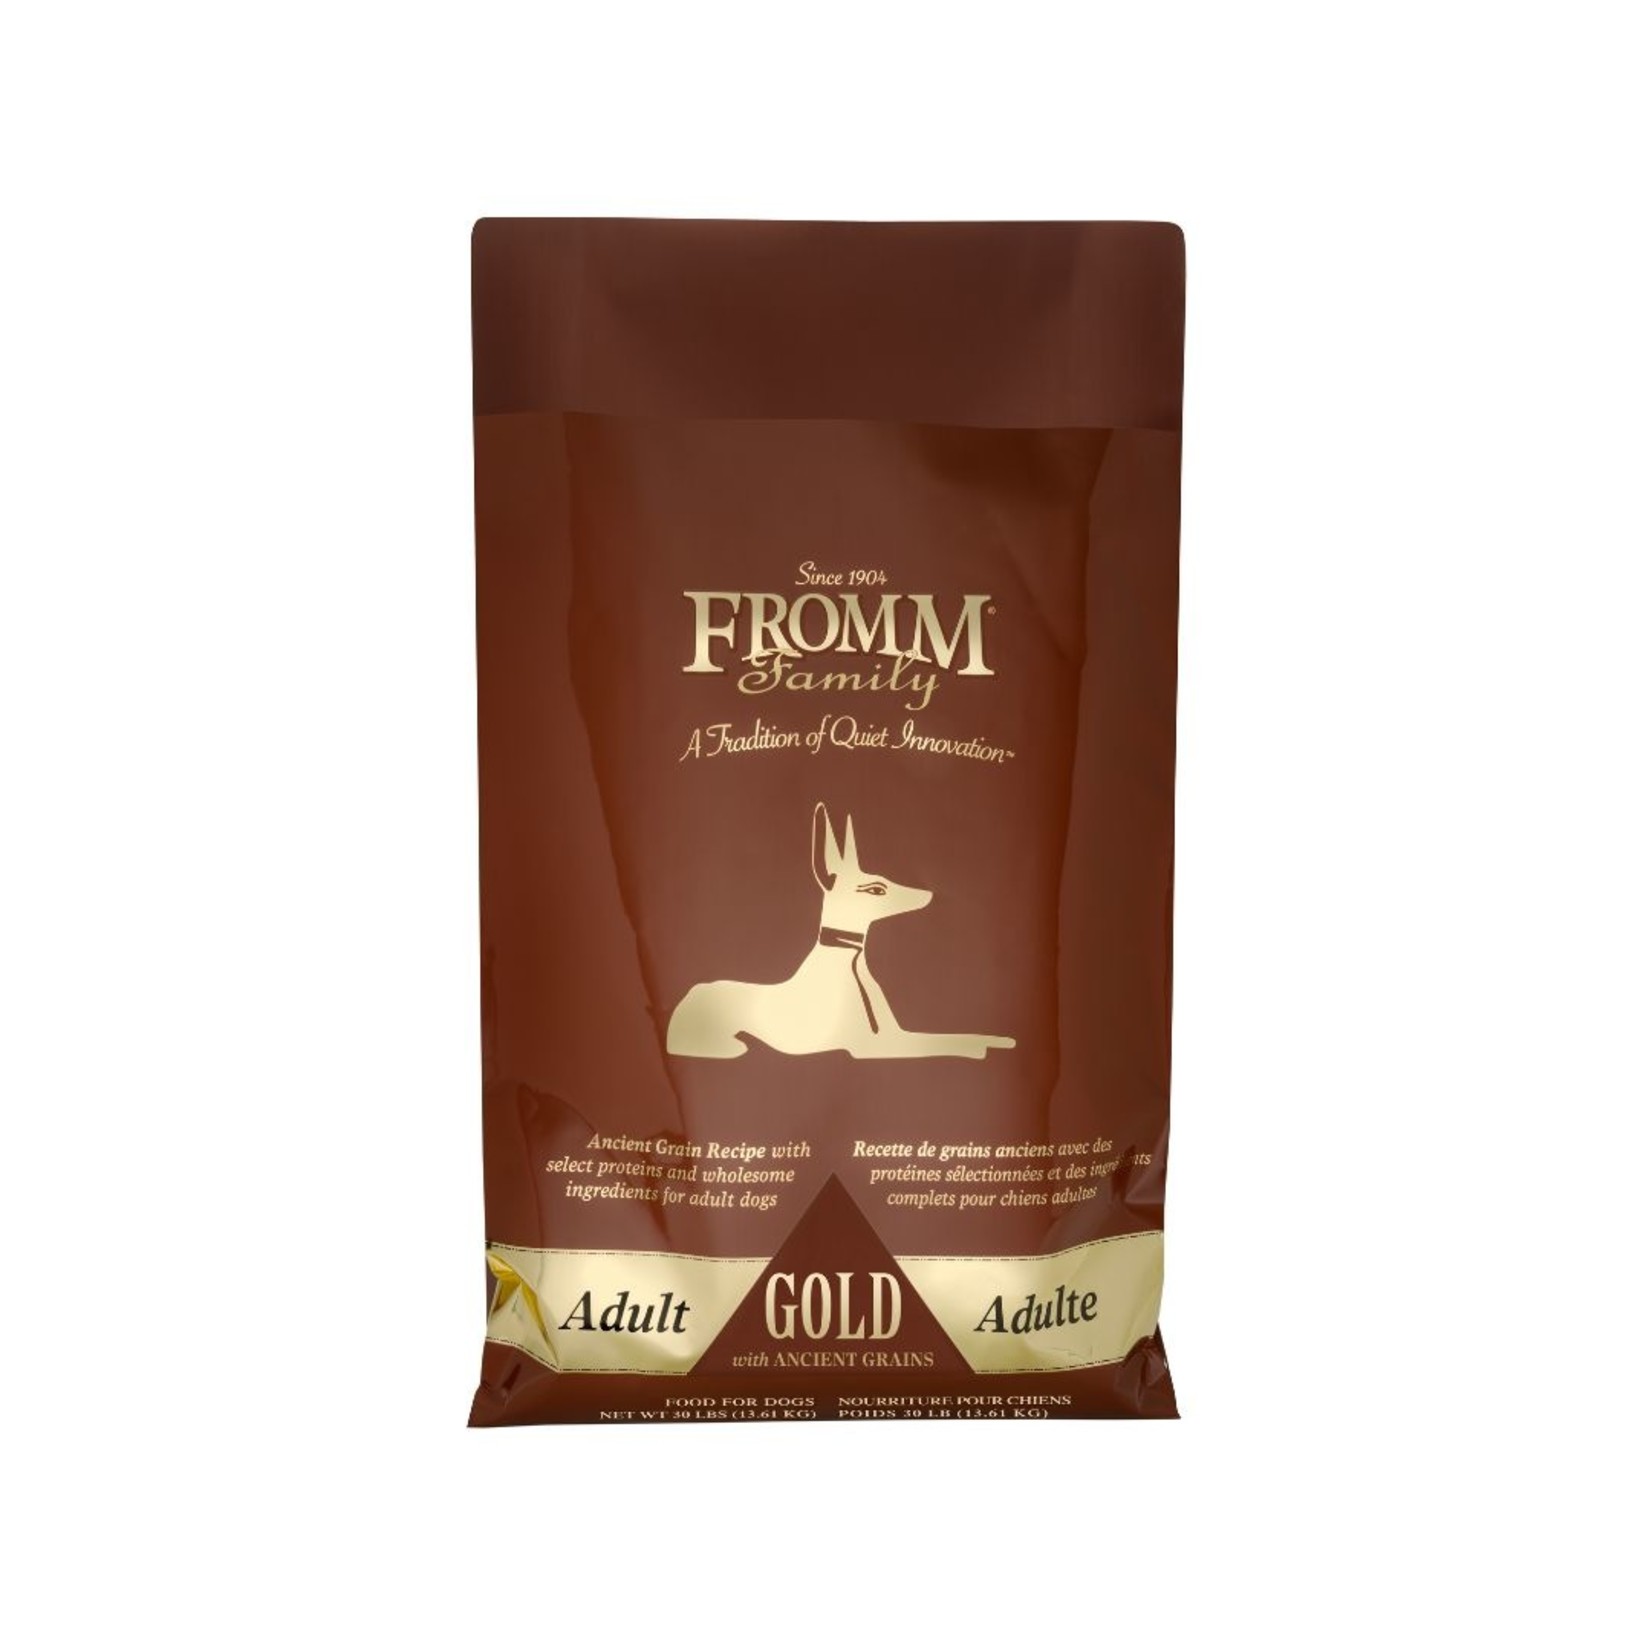 Fromm Fromm Adult Gold with Ancient Grains